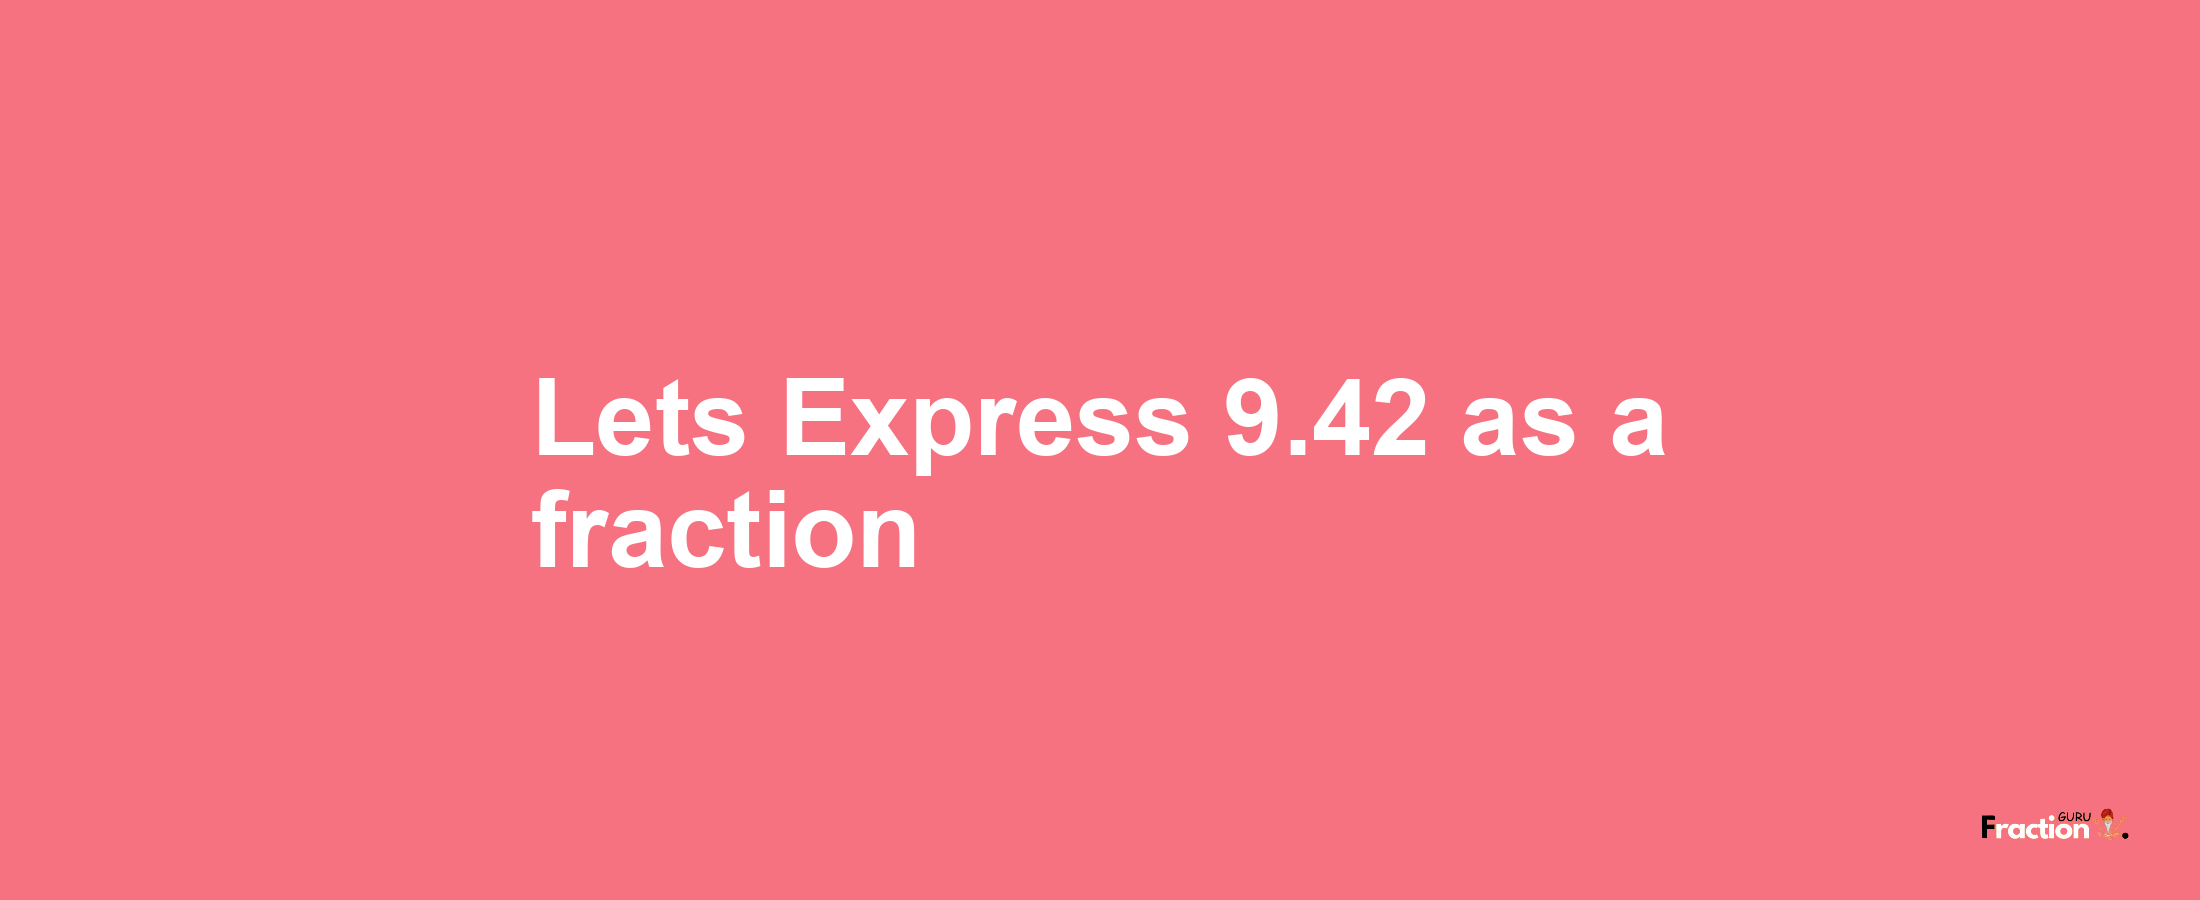 Lets Express 9.42 as afraction